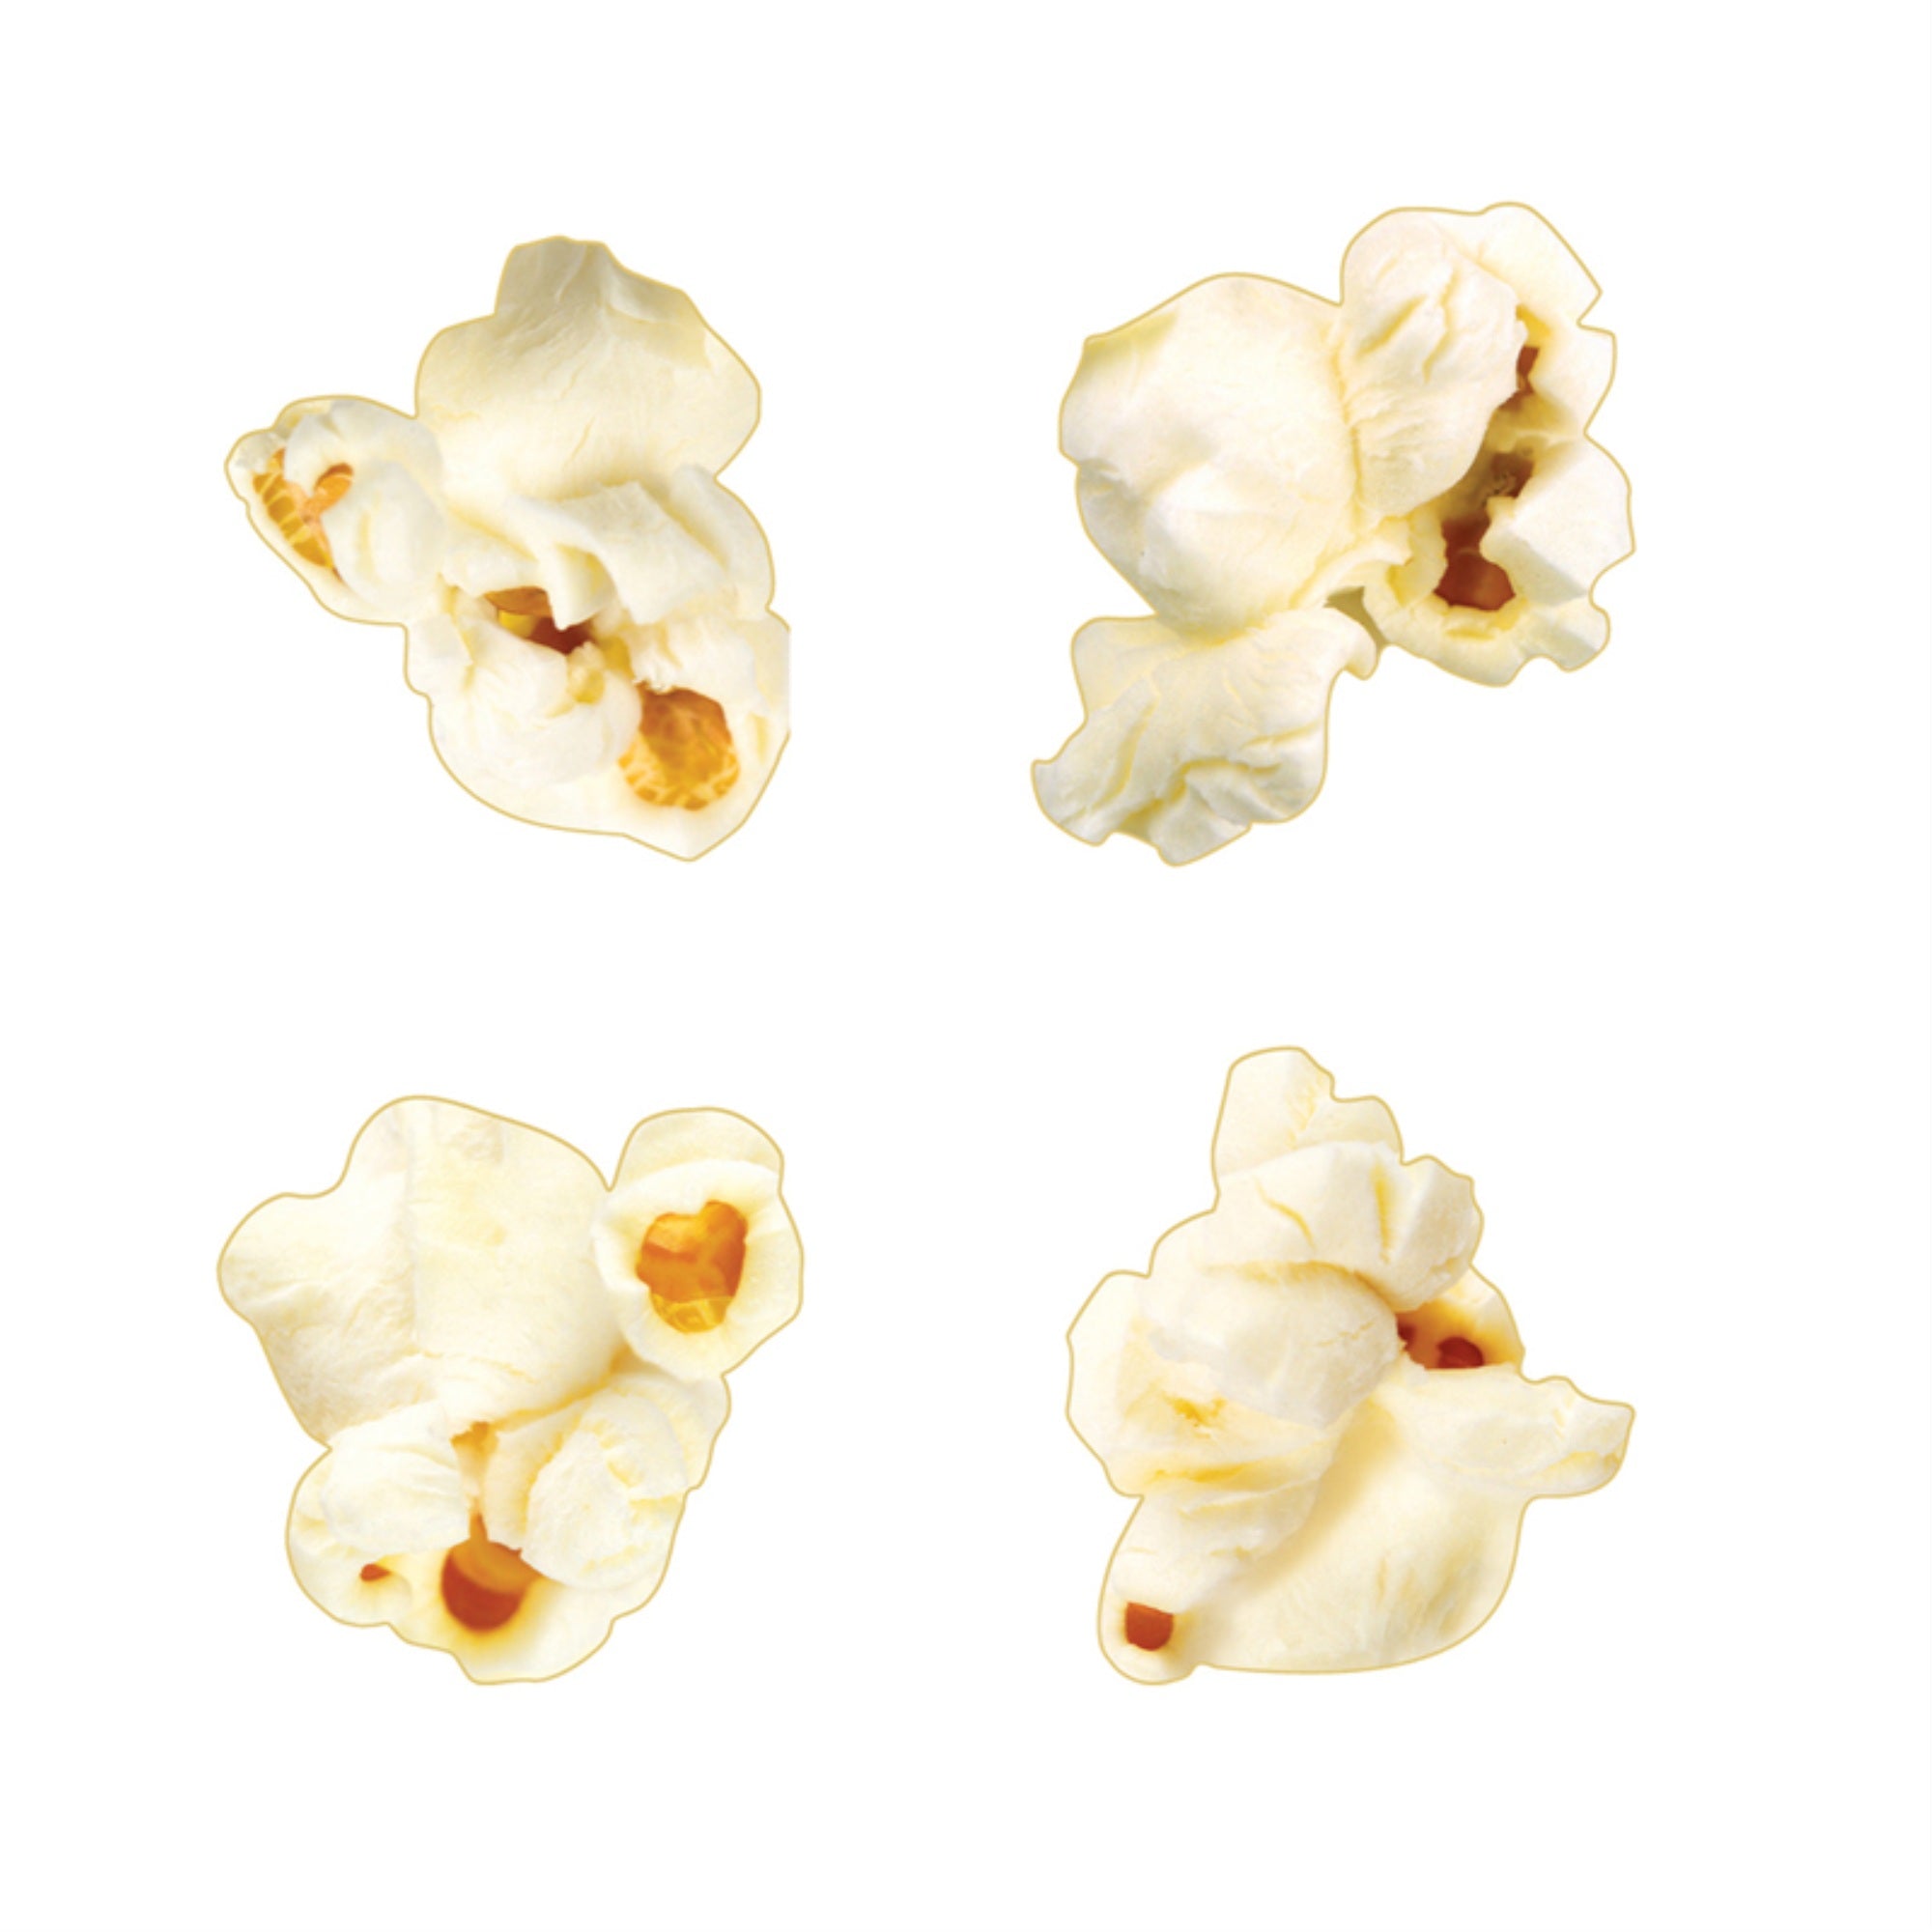 Popcorn Mini Accents Variety Pack